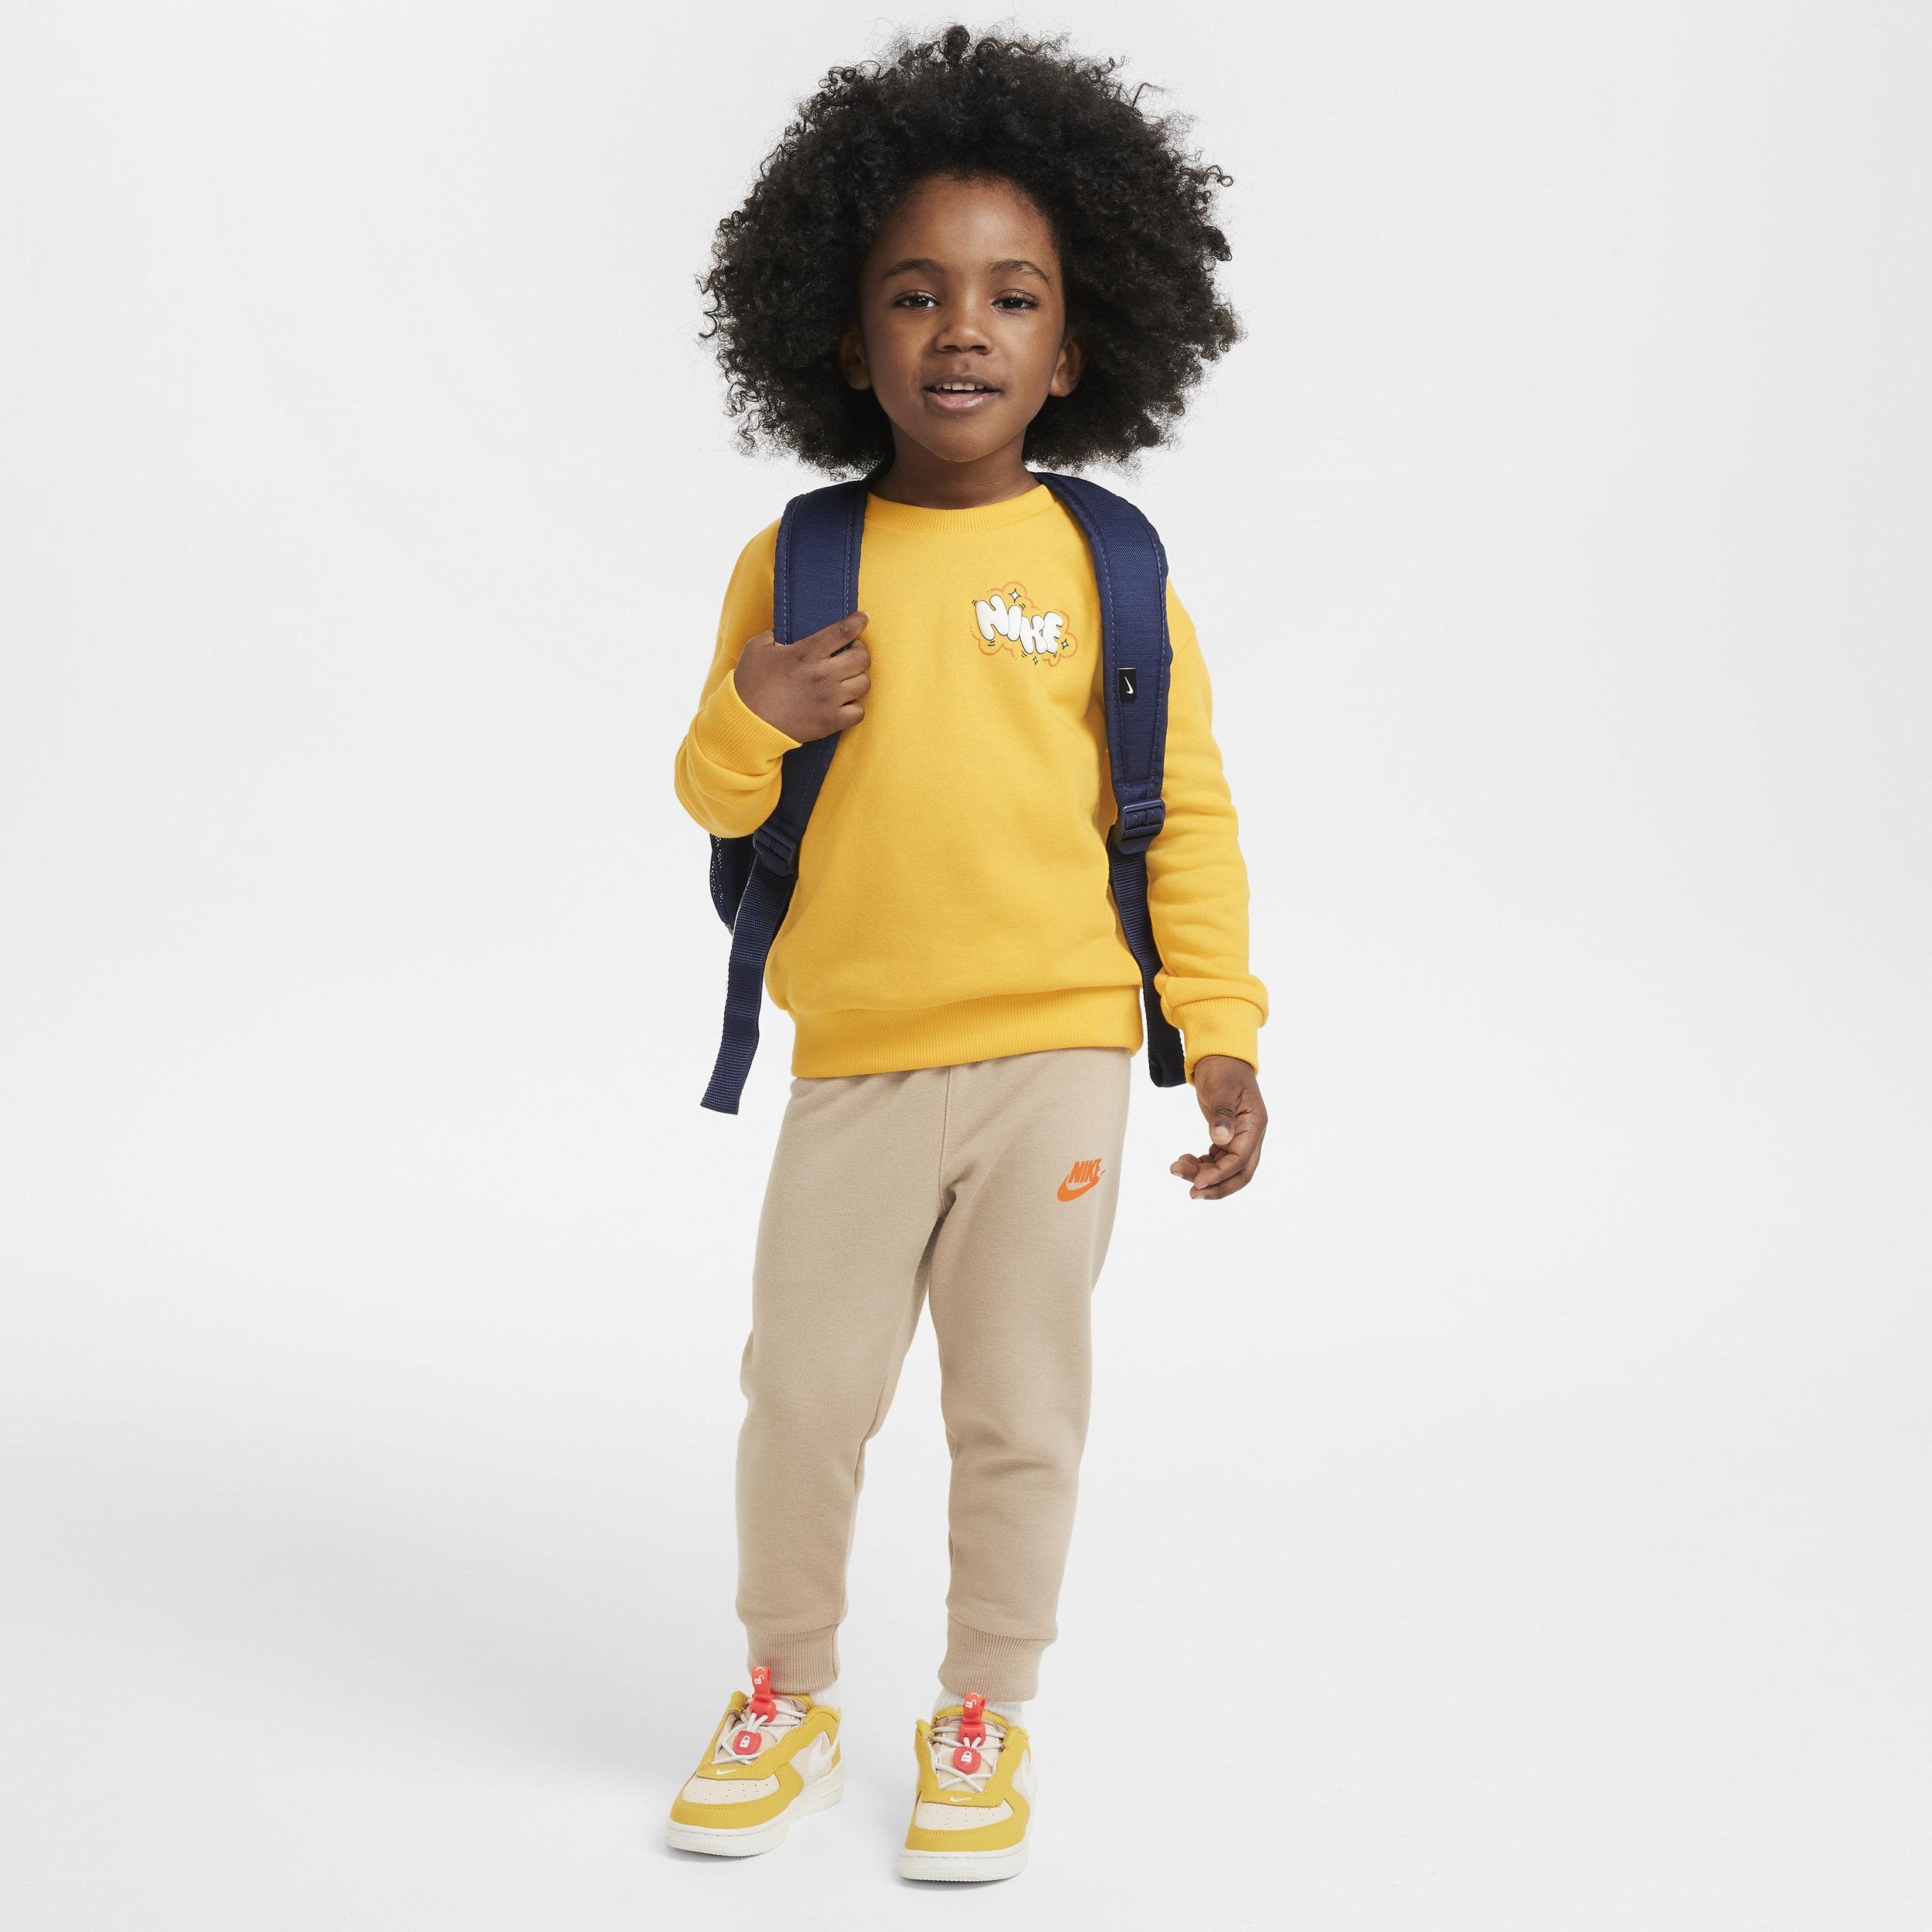 Nike Sportswear Create Your Own Adventure Toddler French Terry Graphic Crew Set by NIKE